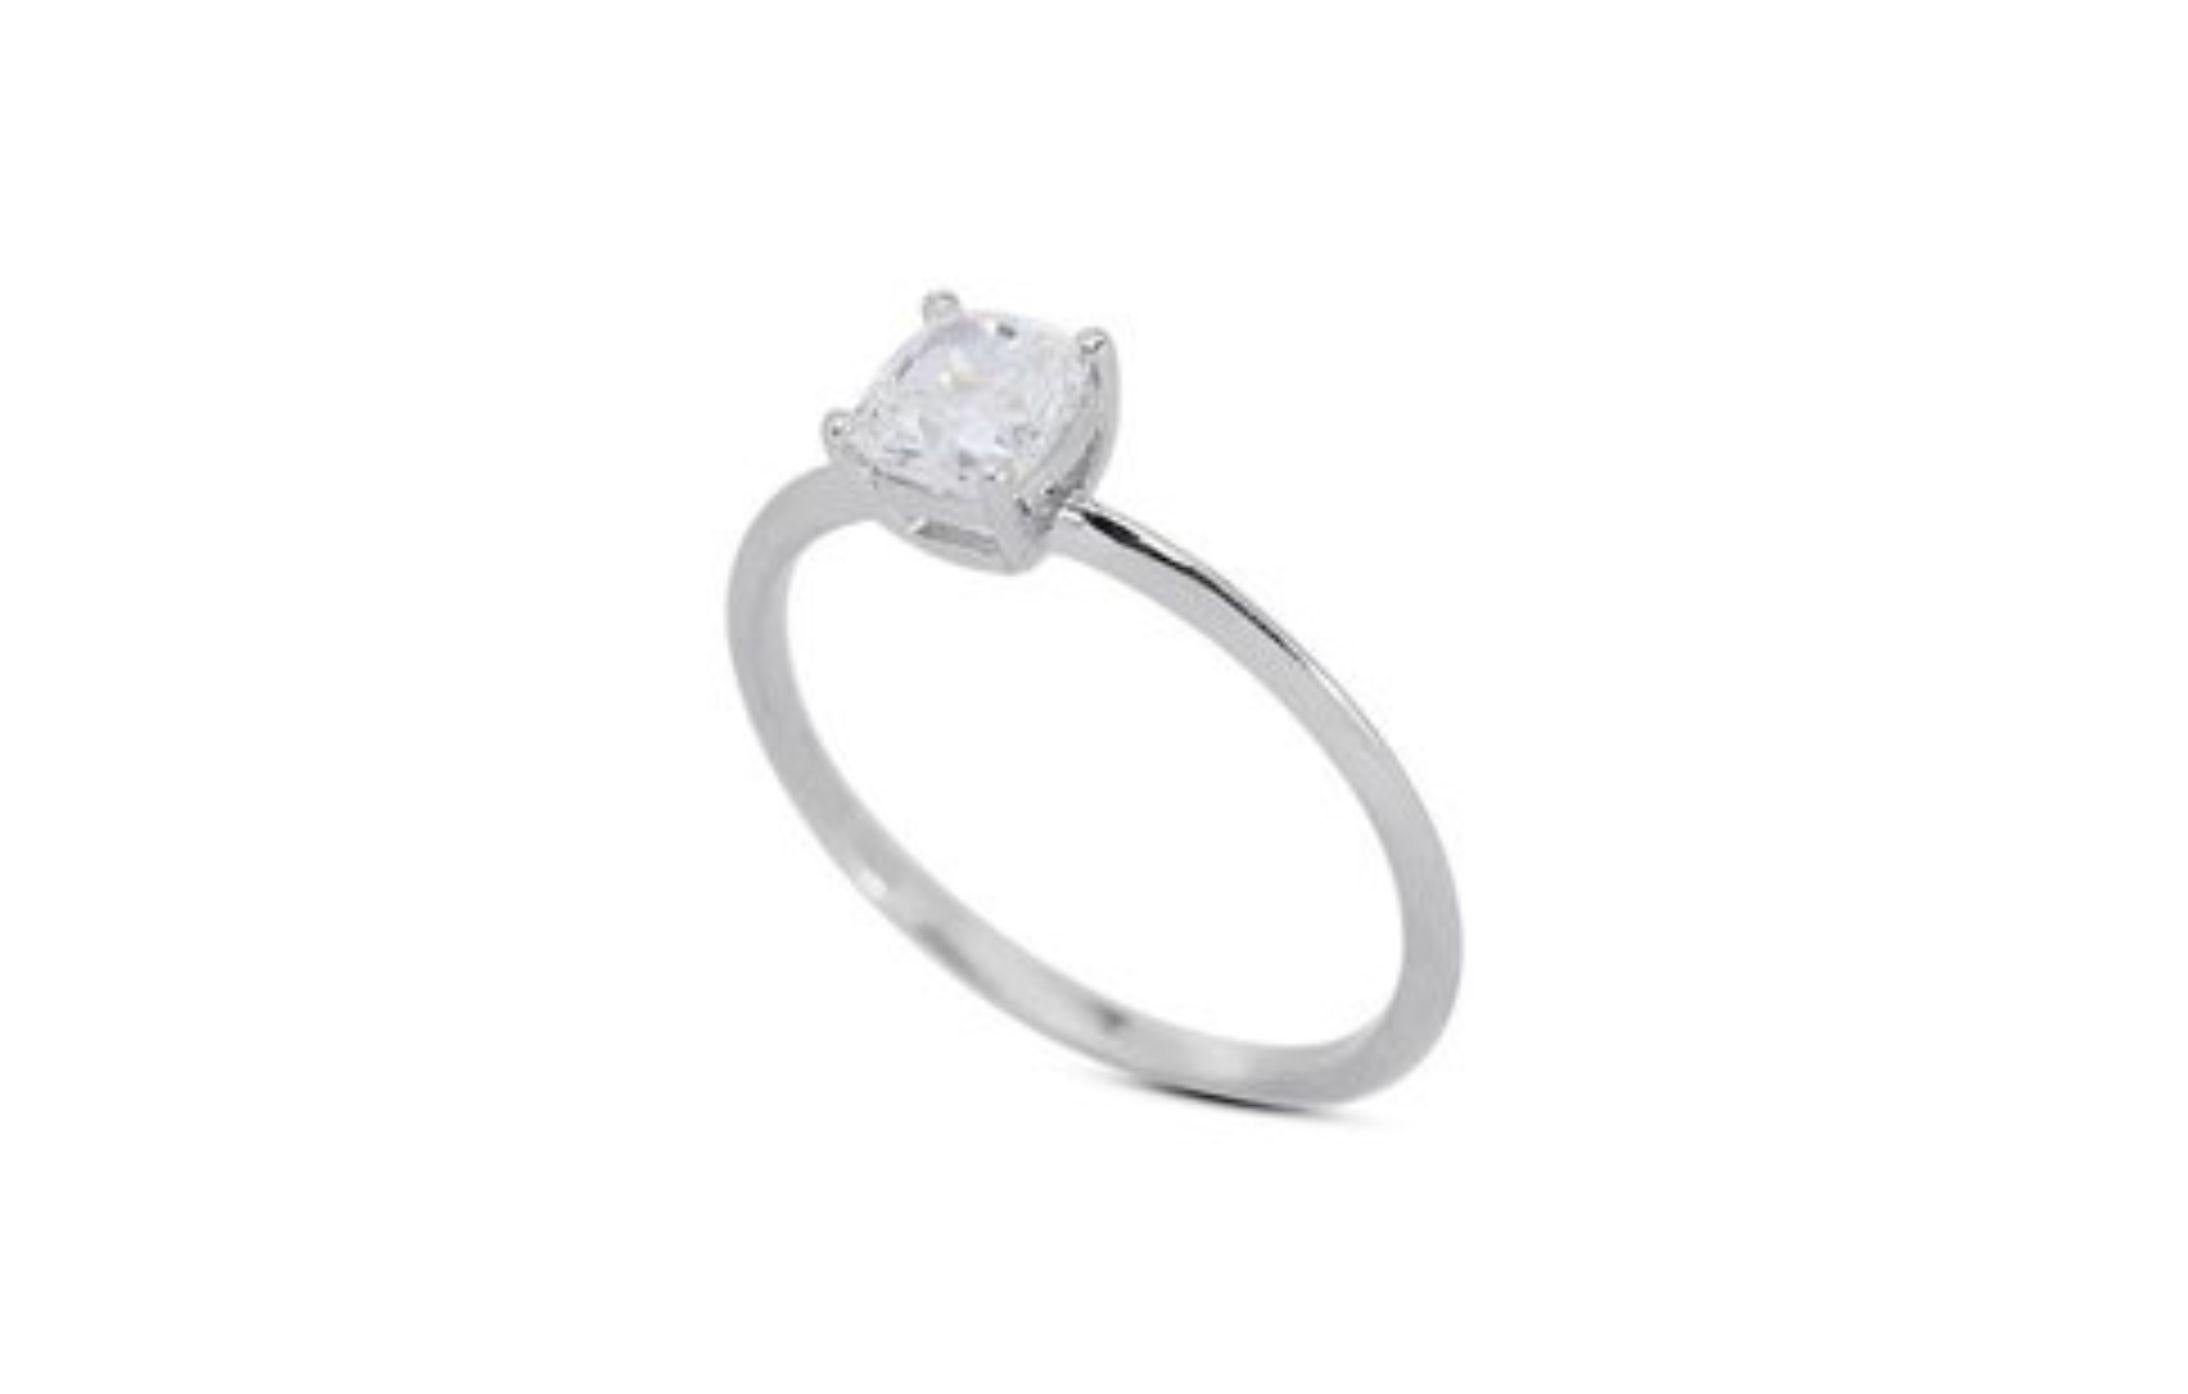 Women's Dazzling 1.52 Carat Cushion Modified Diamond Ring in 18K White Gold For Sale